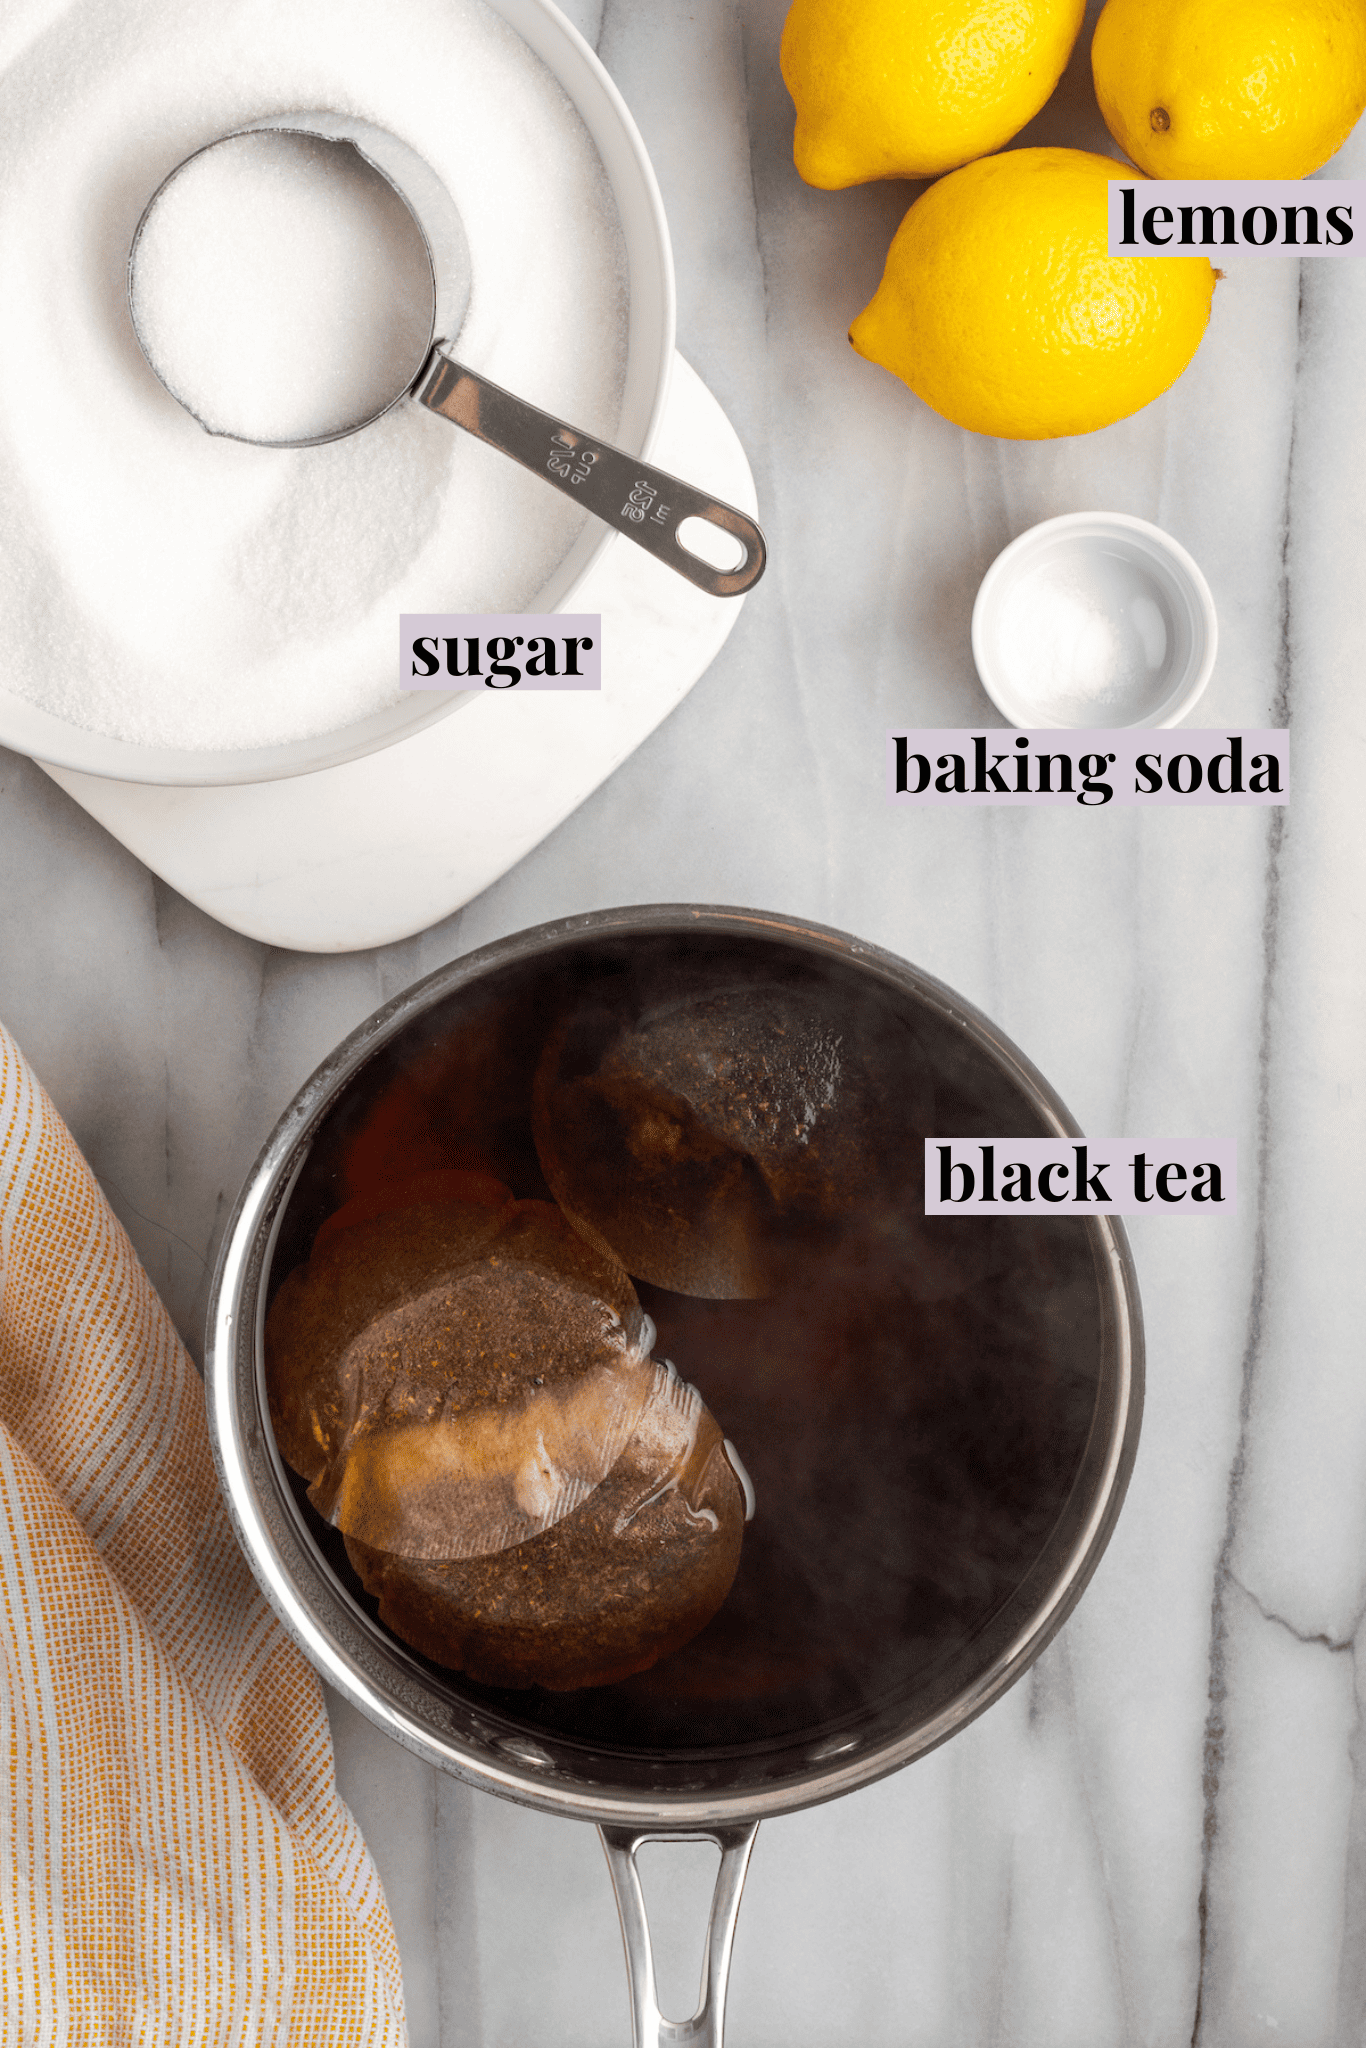 Overhead view of ingredients for Southern sweet tea